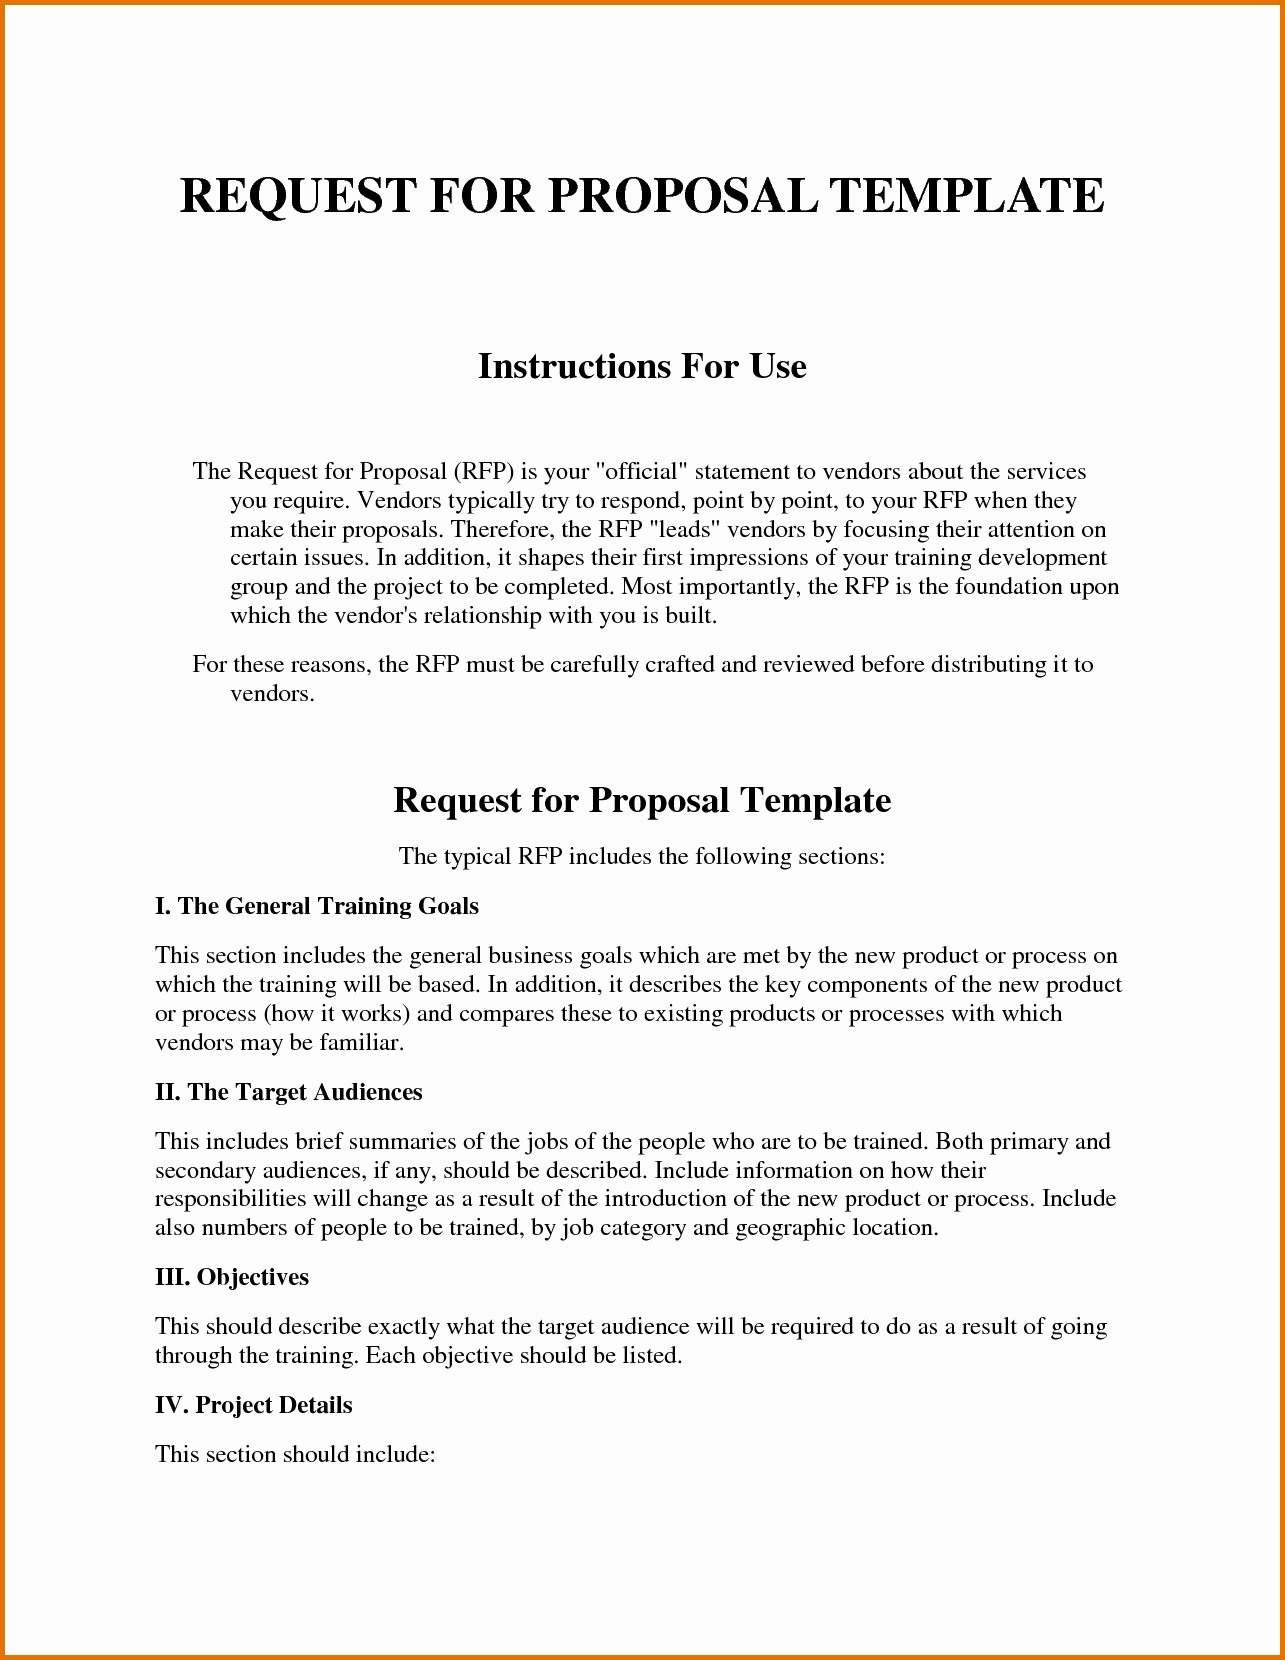 Website Proposal Template Word New Request for Proposal Template Wordreference Letters Words